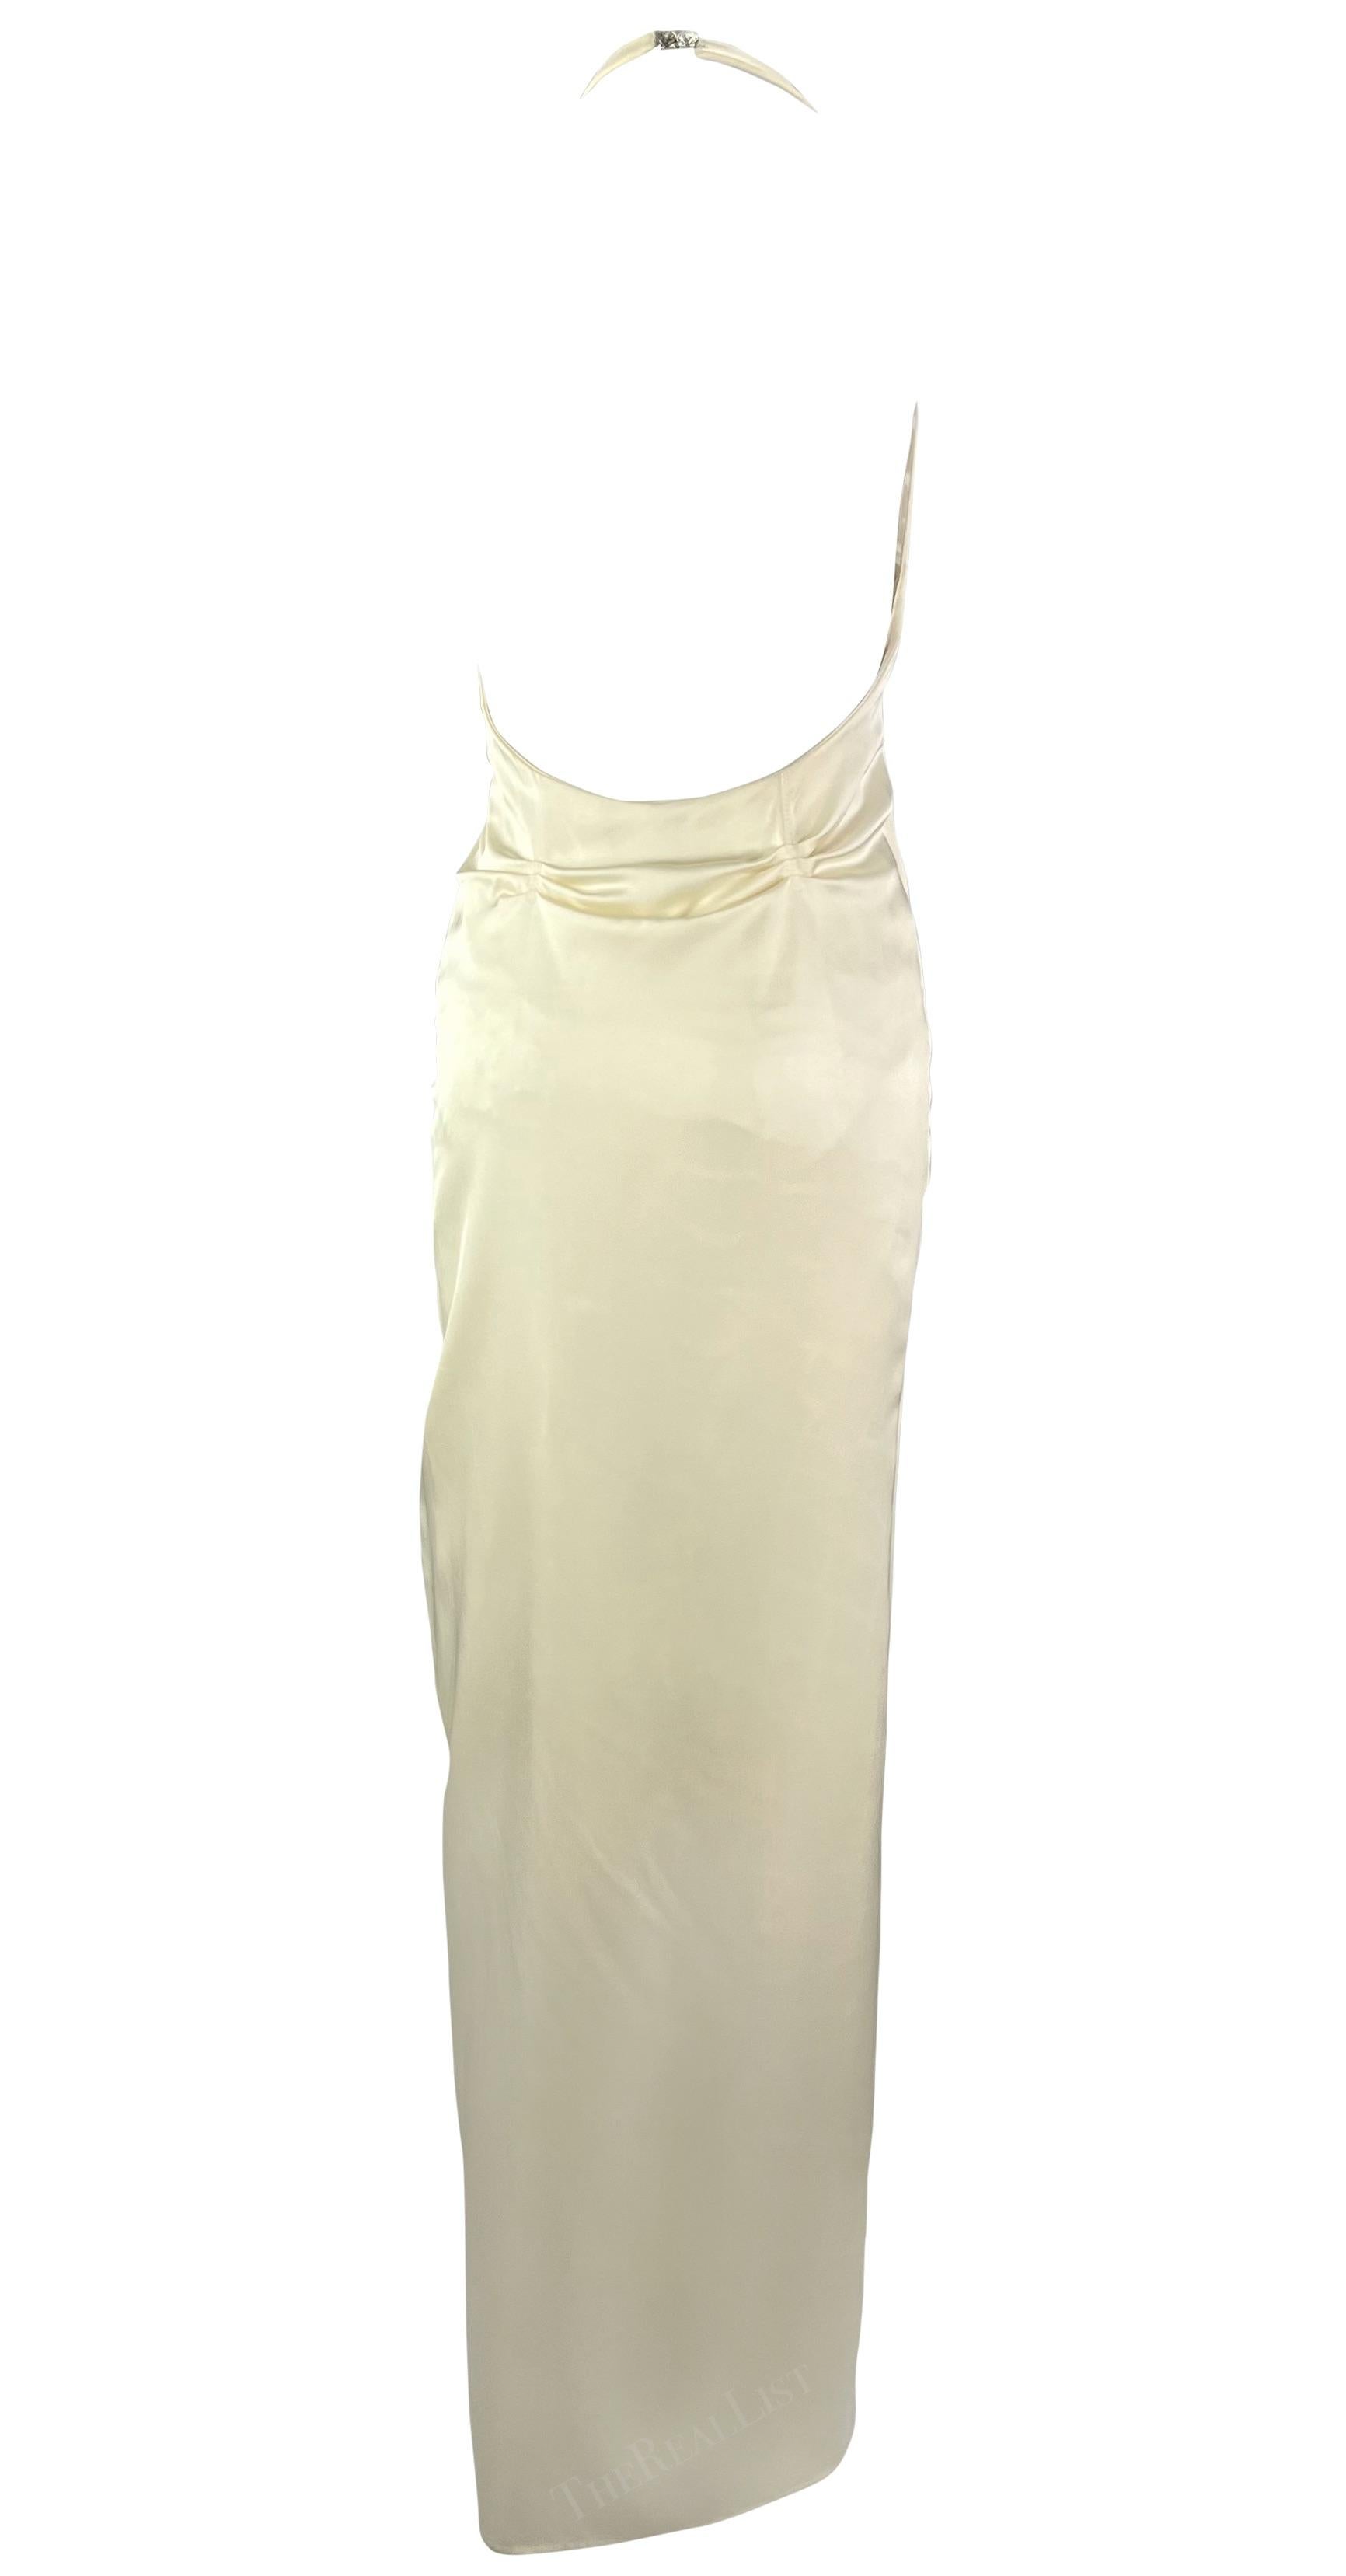 S/S 1999 Gianni Versace by Donatella Ruched Off-White High-Slit Backless Gown 3